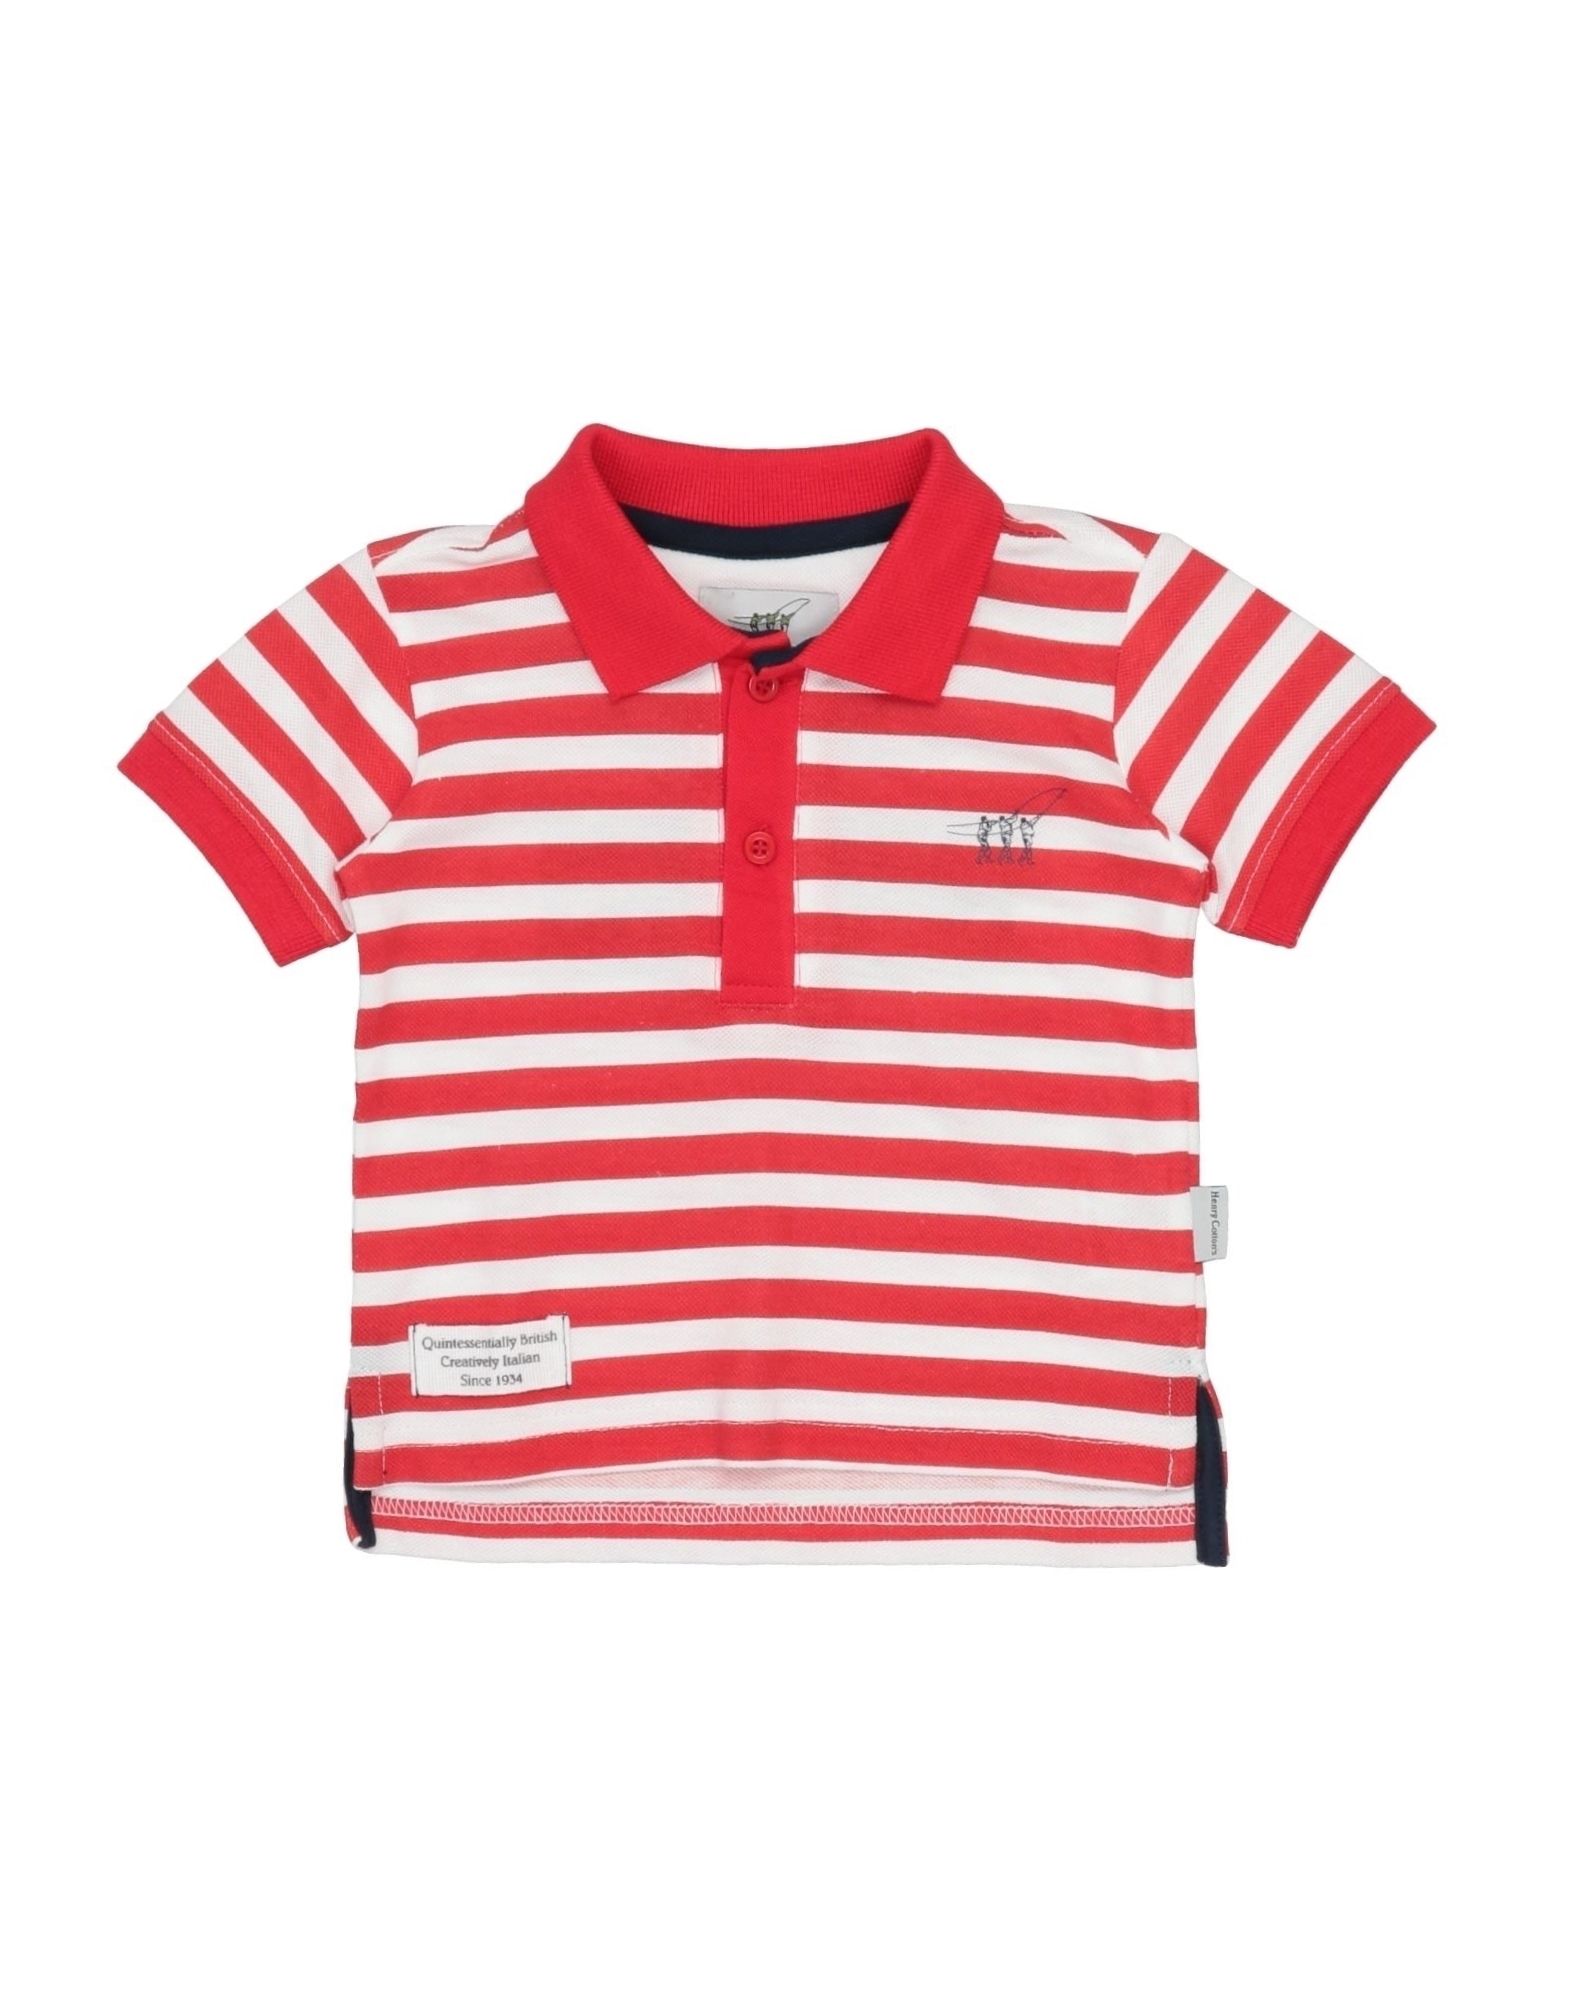 Henry Cotton's Kids' Polo Shirts In Red